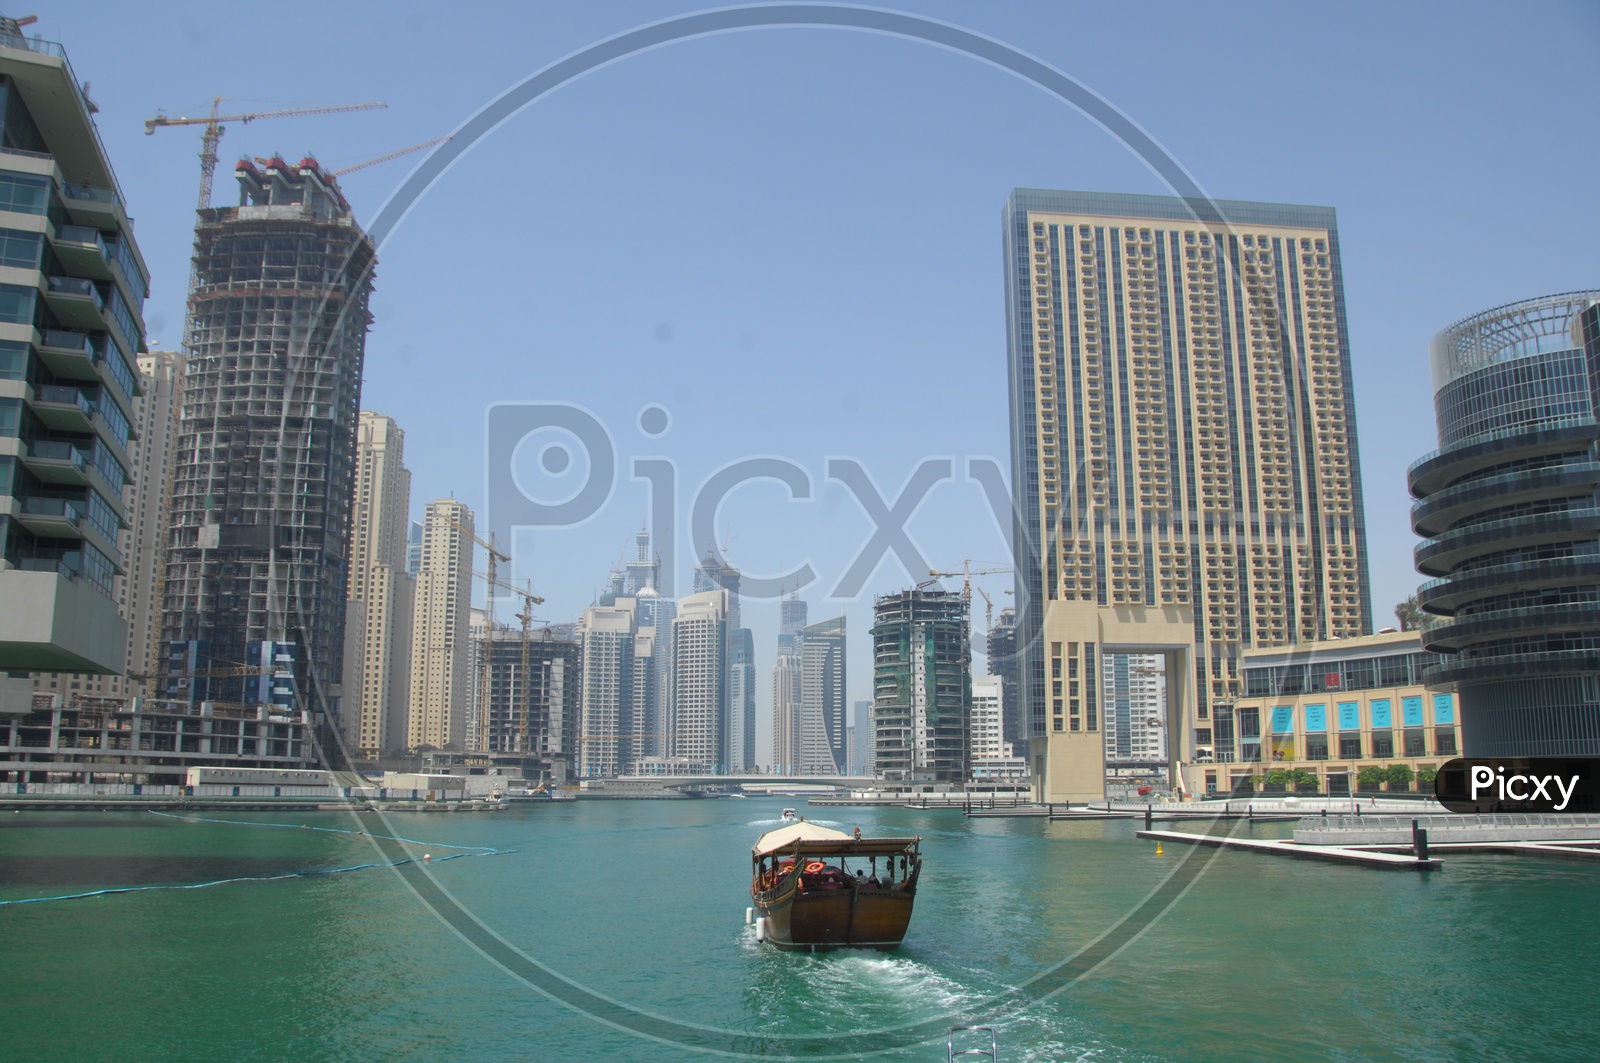 View of the city from of the beach - Blue waters, boat, tall buildings seen